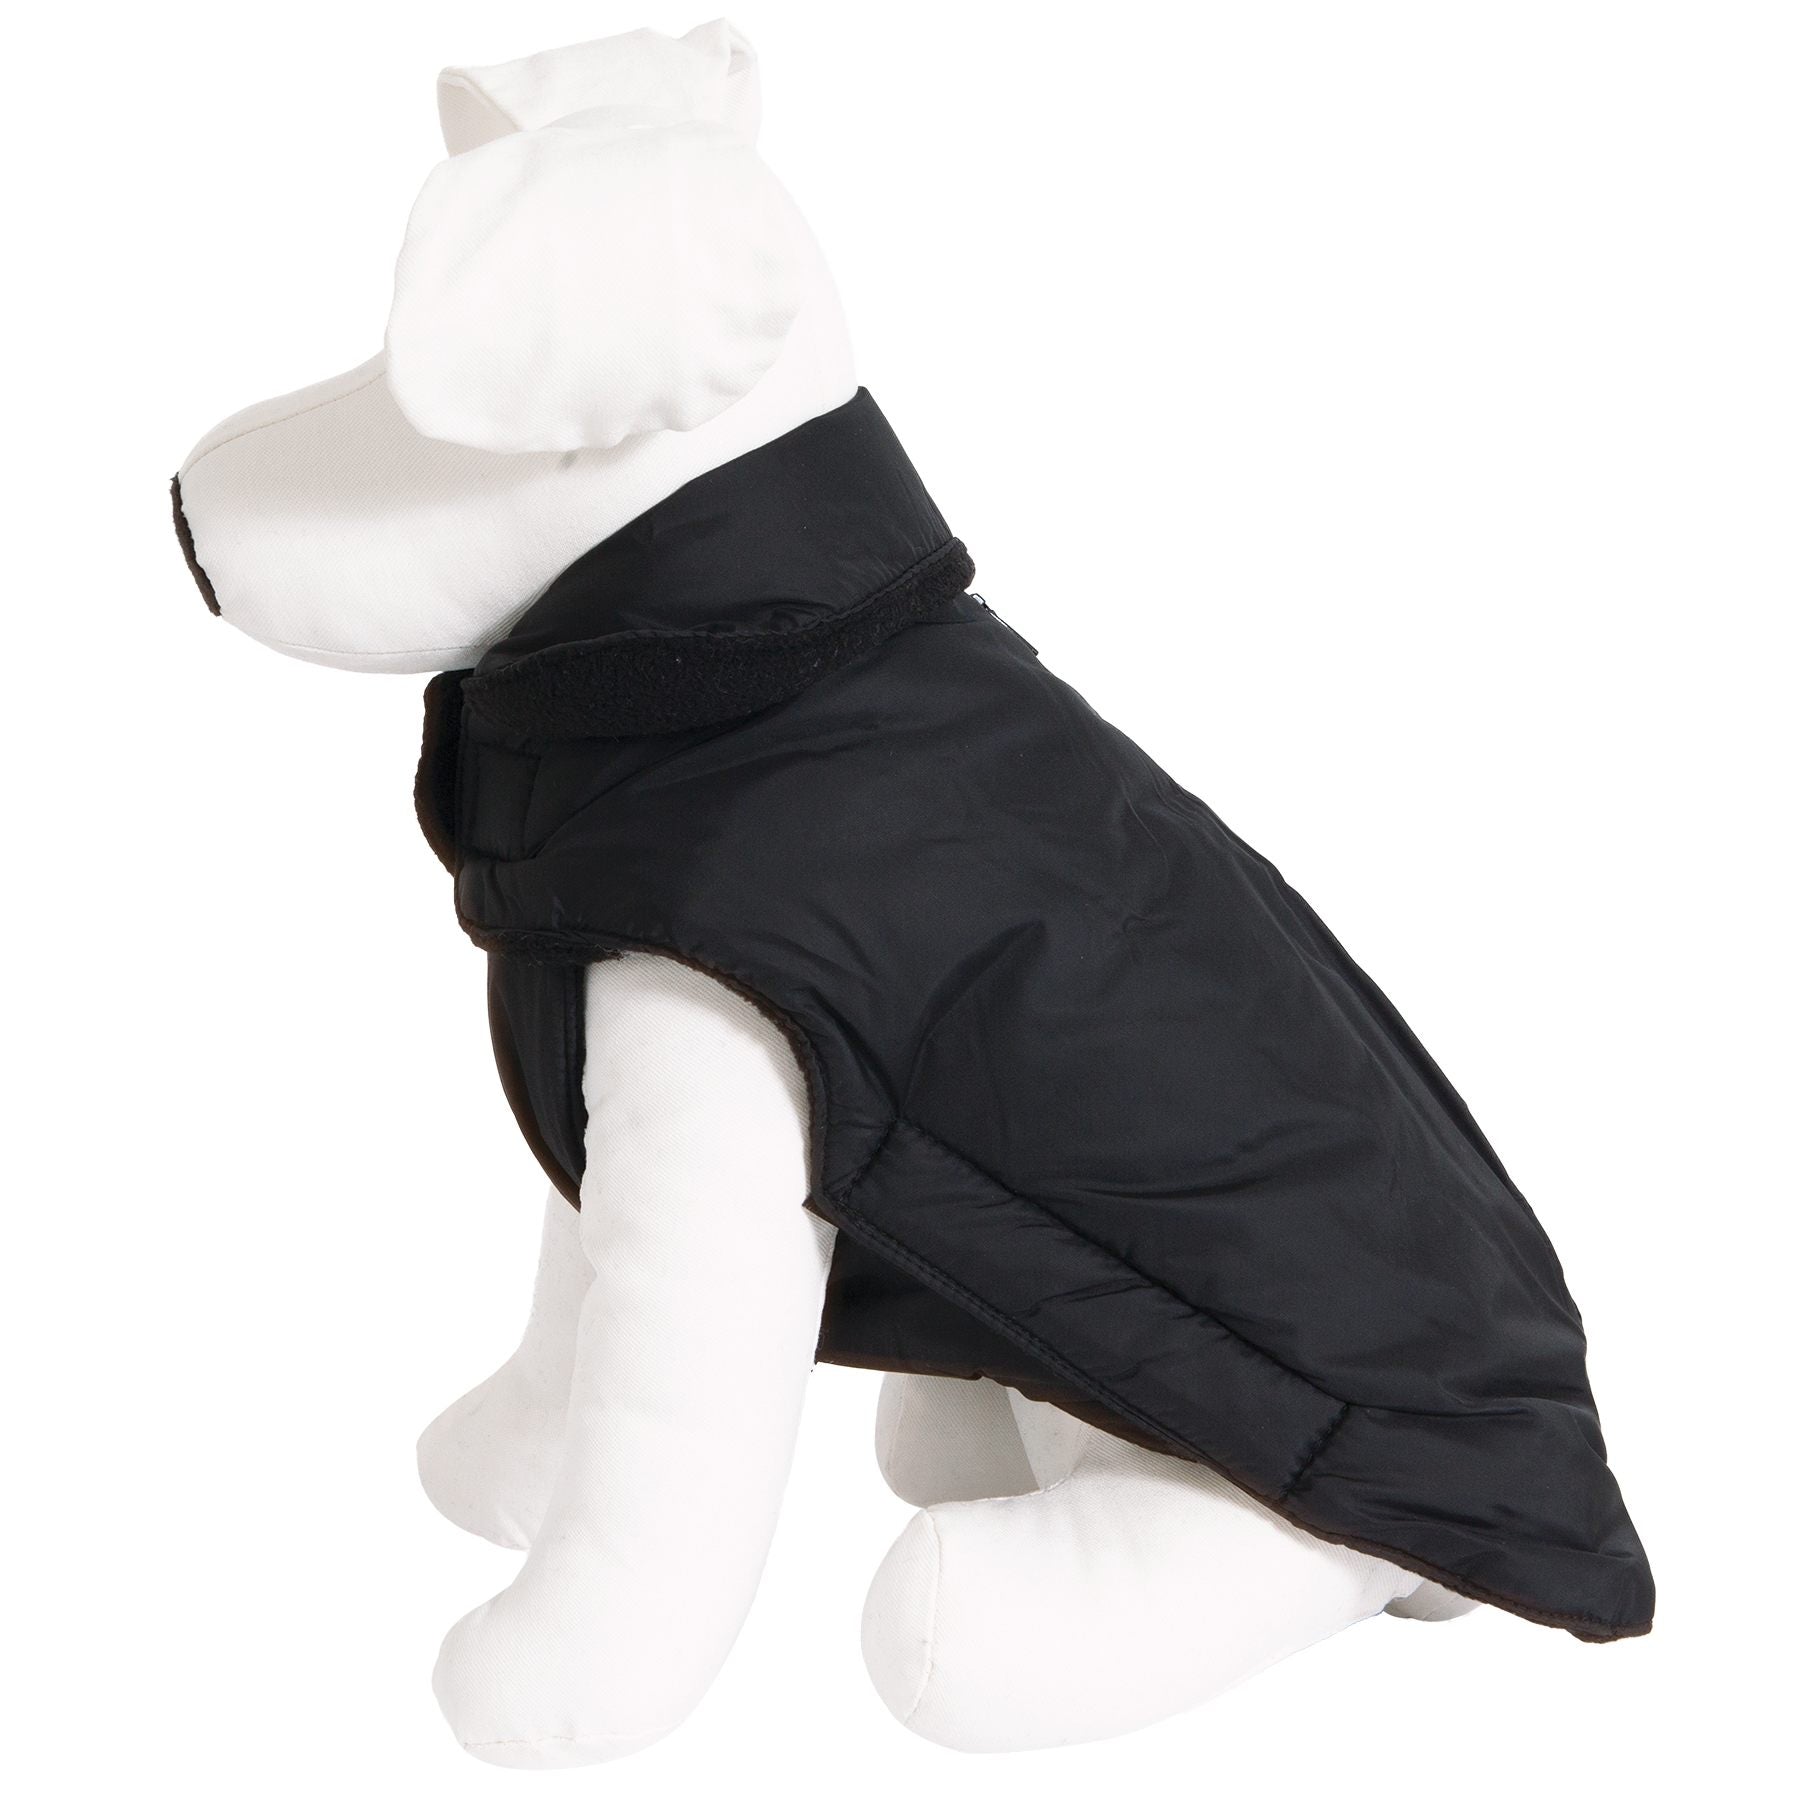 Wouapy Eco Raincoat for Small & Medium Dogs